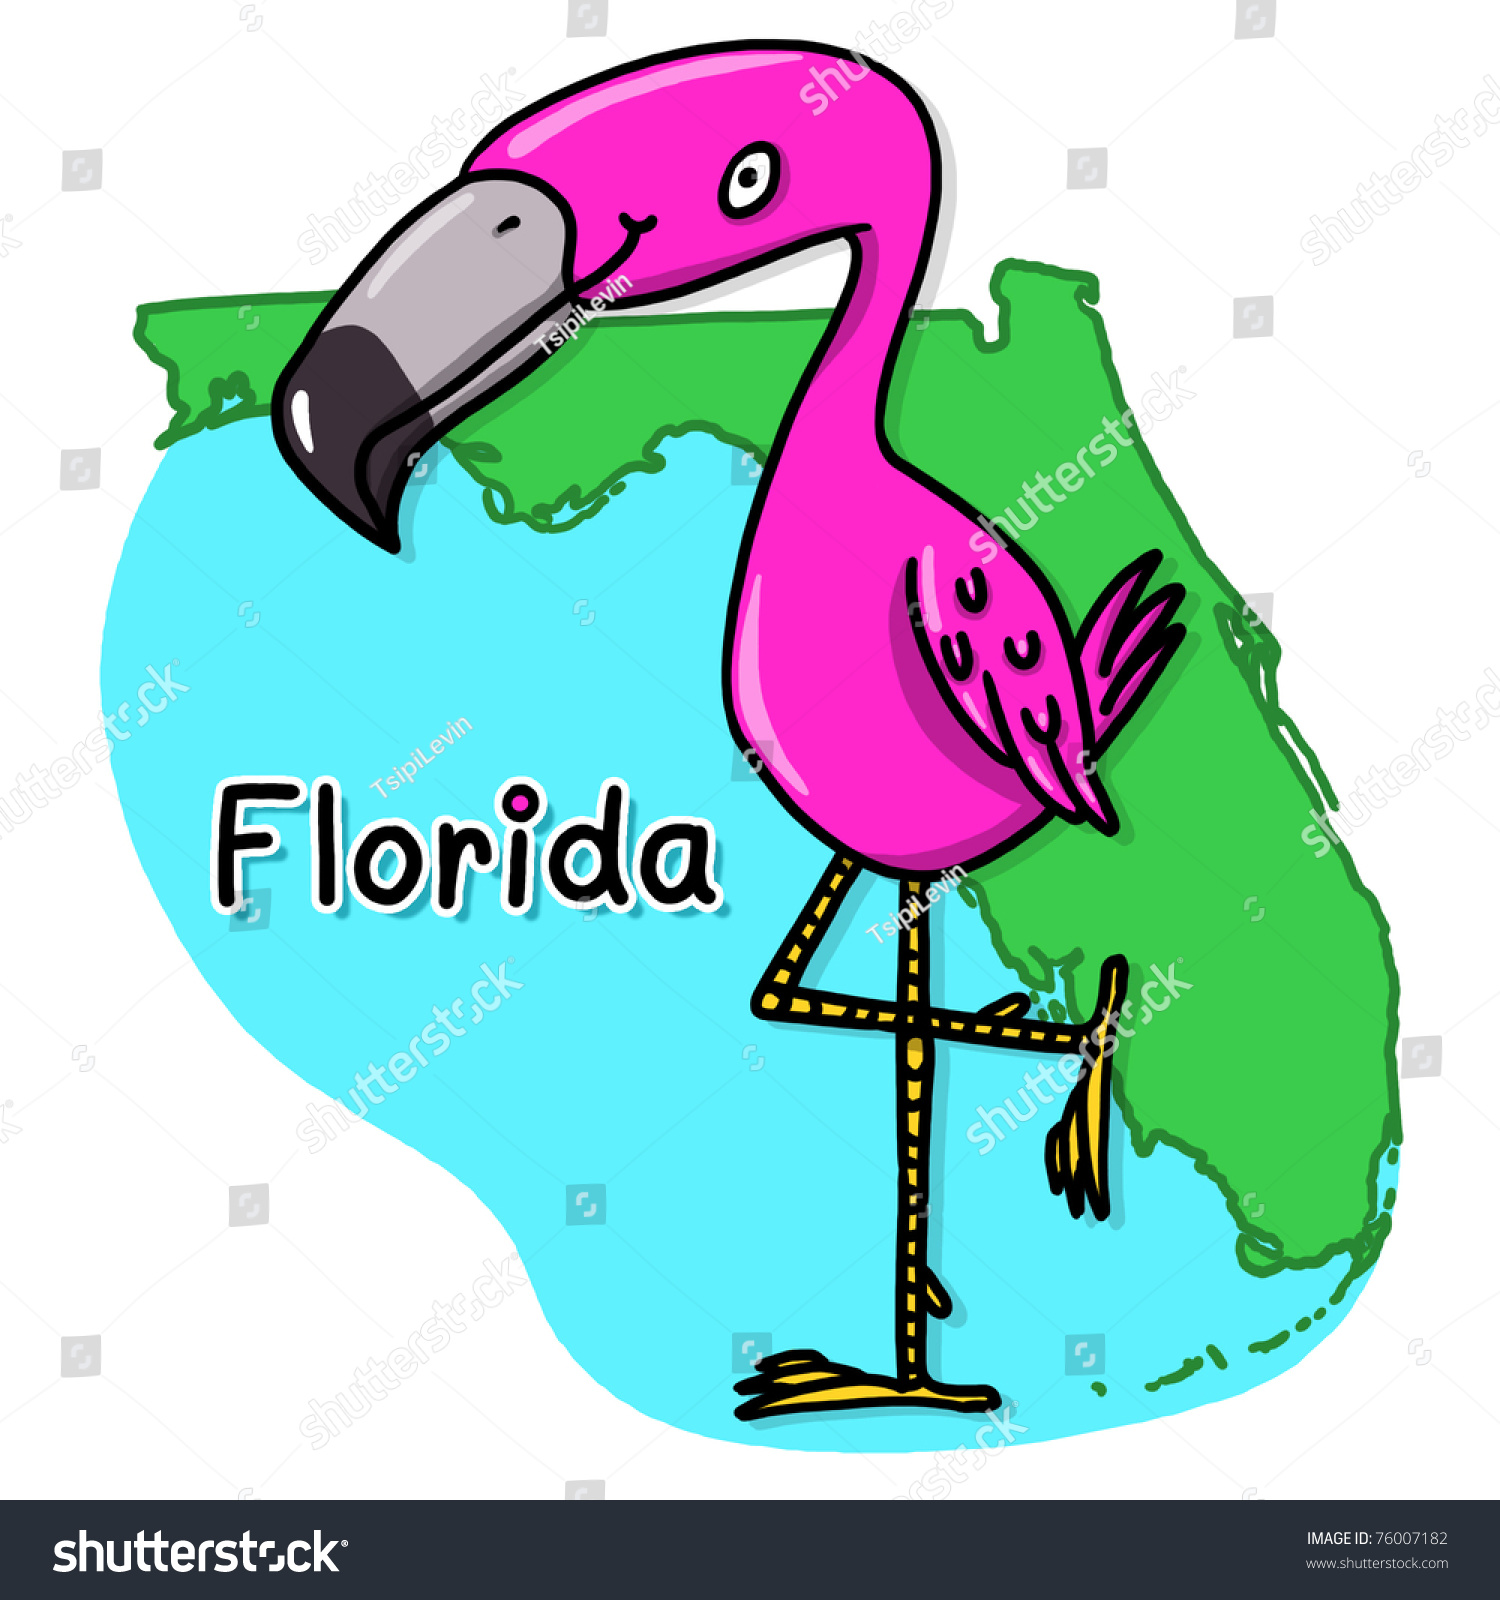 clipart map of florida - photo #43